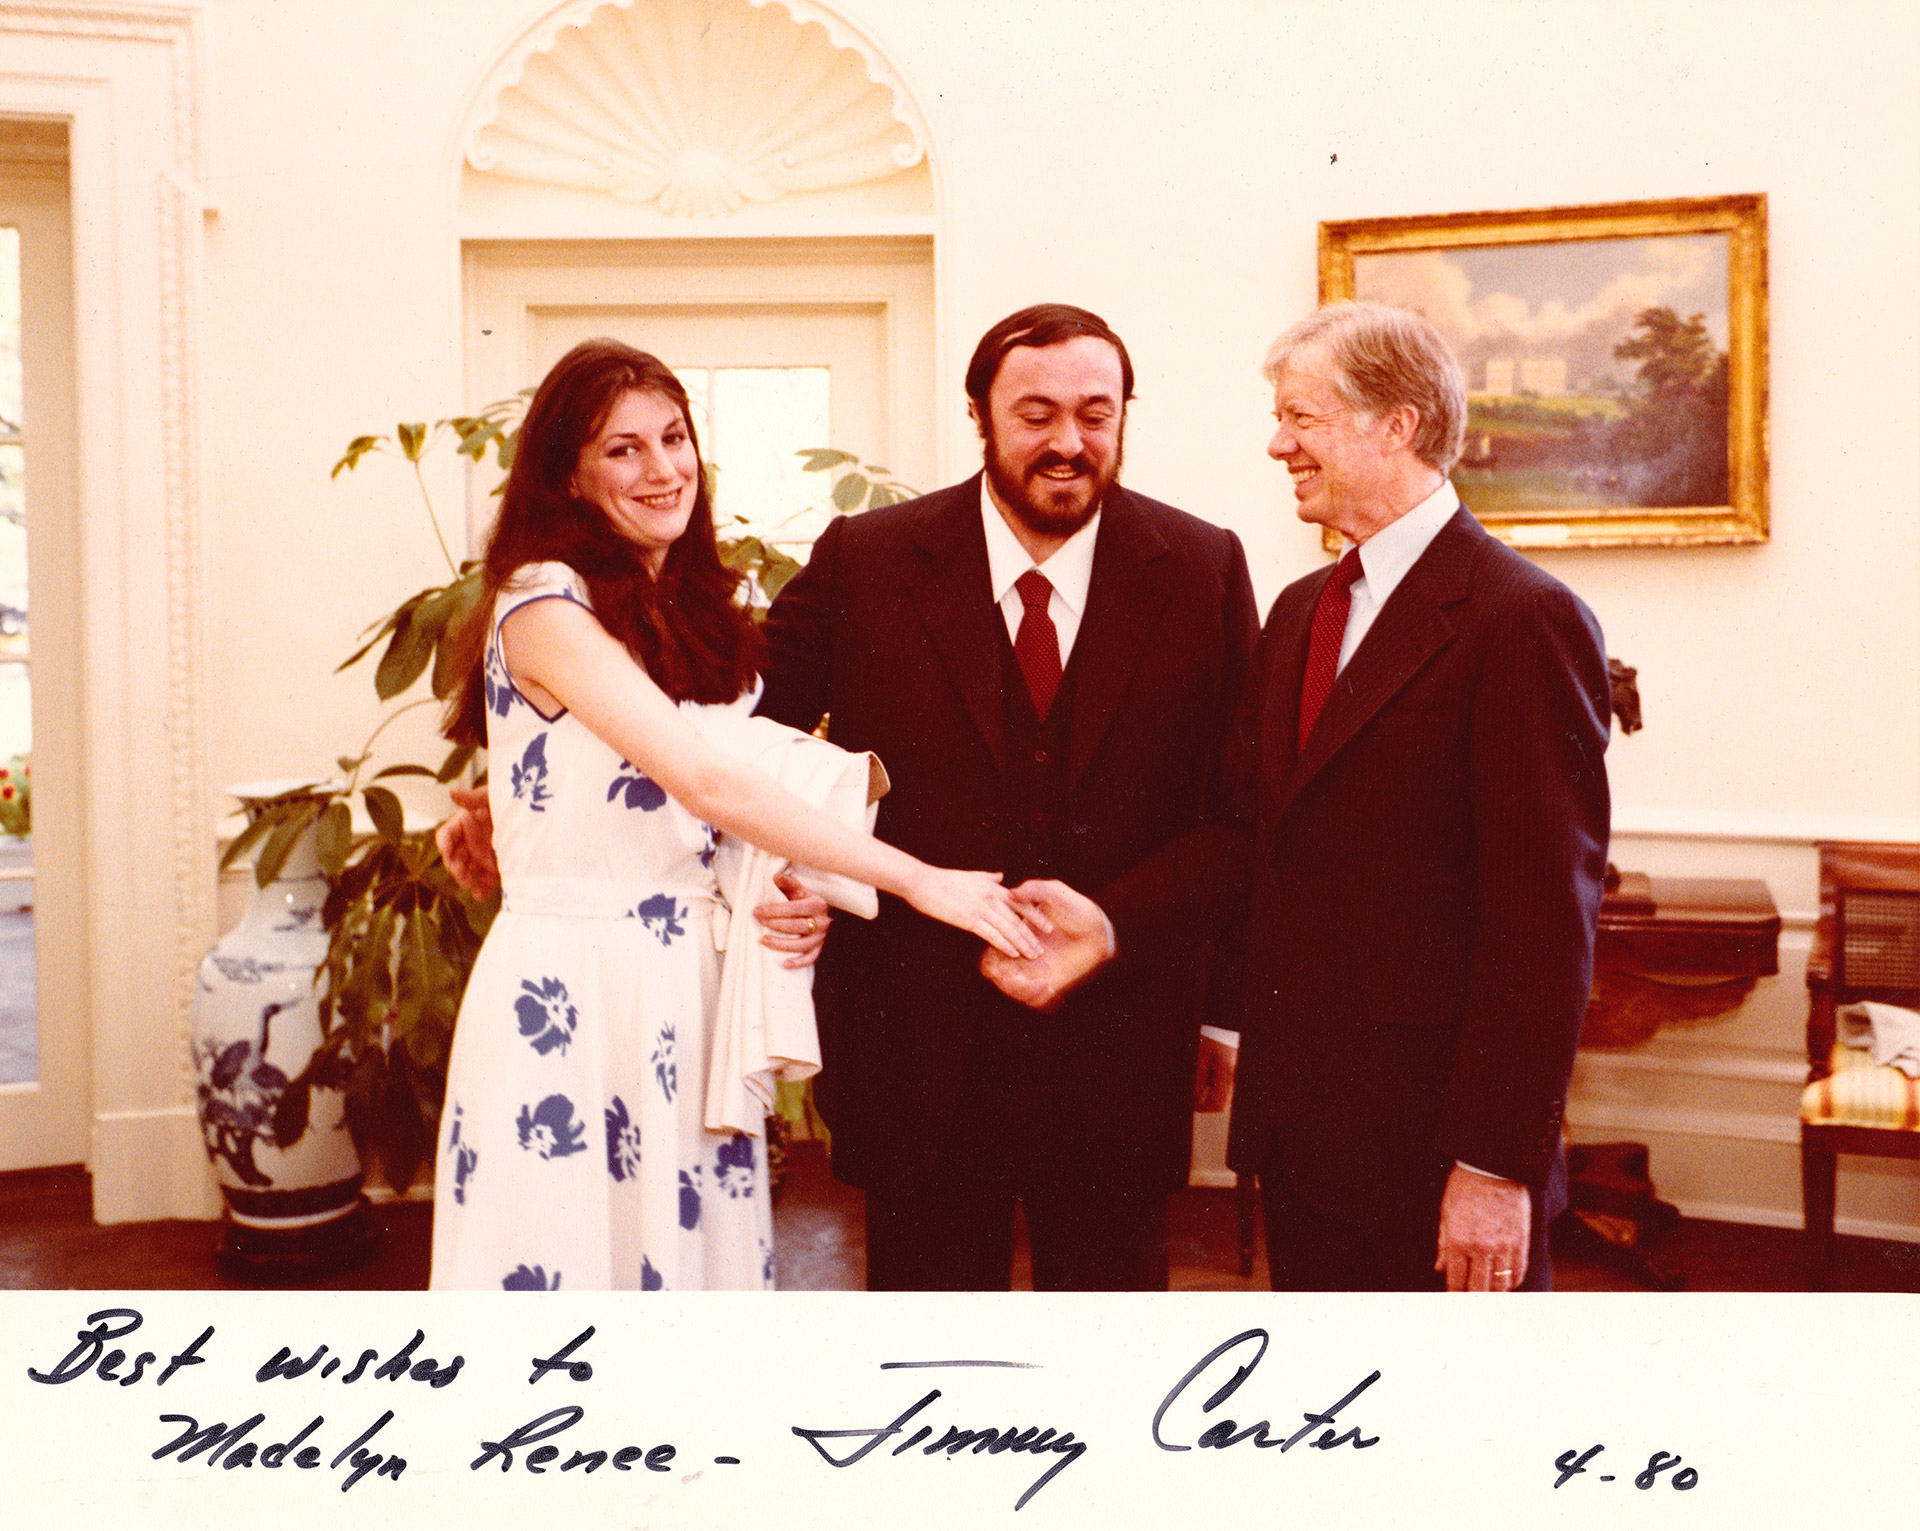 Oval office with president Carter